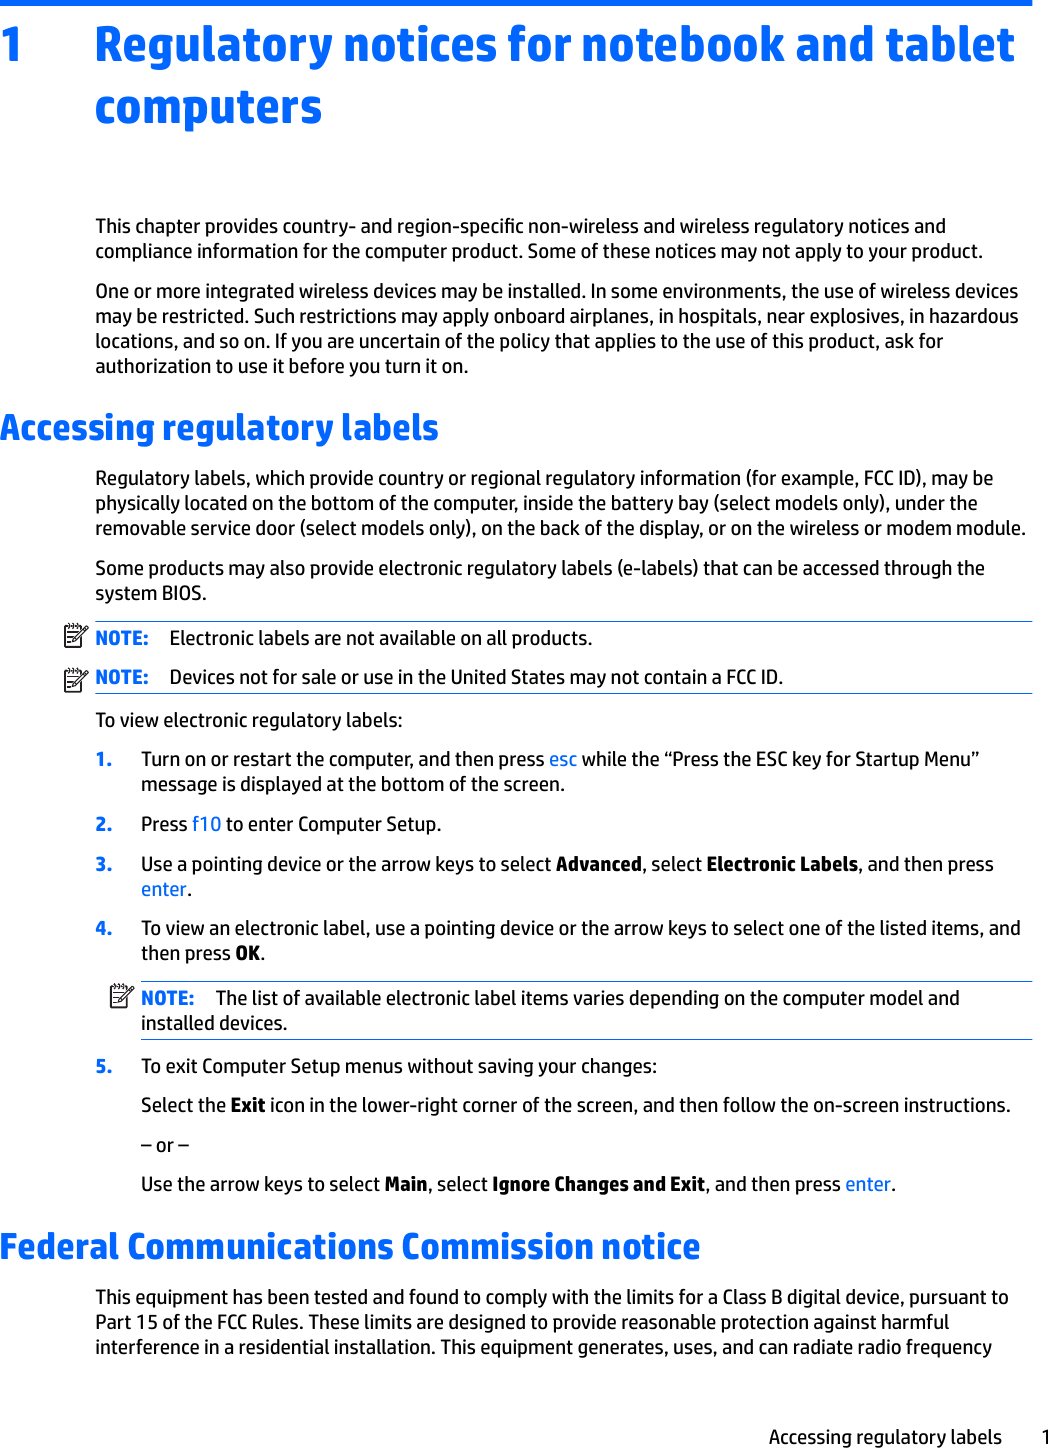 1 Regulatory notices for notebook and tablet computersThis chapter provides country- and region-specic non-wireless and wireless regulatory notices and compliance information for the computer product. Some of these notices may not apply to your product.One or more integrated wireless devices may be installed. In some environments, the use of wireless devices may be restricted. Such restrictions may apply onboard airplanes, in hospitals, near explosives, in hazardous locations, and so on. If you are uncertain of the policy that applies to the use of this product, ask for authorization to use it before you turn it on.Accessing regulatory labelsRegulatory labels, which provide country or regional regulatory information (for example, FCC ID), may be physically located on the bottom of the computer, inside the battery bay (select models only), under the removable service door (select models only), on the back of the display, or on the wireless or modem module.Some products may also provide electronic regulatory labels (e-labels) that can be accessed through the system BIOS.NOTE: Electronic labels are not available on all products.NOTE: Devices not for sale or use in the United States may not contain a FCC ID. To view electronic regulatory labels:1. Turn on or restart the computer, and then press esc while the “Press the ESC key for Startup Menu” message is displayed at the bottom of the screen.2. Press f10 to enter Computer Setup.3. Use a pointing device or the arrow keys to select Advanced, select Electronic Labels, and then press enter.4. To view an electronic label, use a pointing device or the arrow keys to select one of the listed items, and then press OK.NOTE: The list of available electronic label items varies depending on the computer model and installed devices.5. To exit Computer Setup menus without saving your changes:Select the Exit icon in the lower-right corner of the screen, and then follow the on-screen instructions.– or –Use the arrow keys to select Main, select Ignore Changes and Exit, and then press enter.Federal Communications Commission noticeThis equipment has been tested and found to comply with the limits for a Class B digital device, pursuant to Part 15 of the FCC Rules. These limits are designed to provide reasonable protection against harmful interference in a residential installation. This equipment generates, uses, and can radiate radio frequency Accessing regulatory labels 1